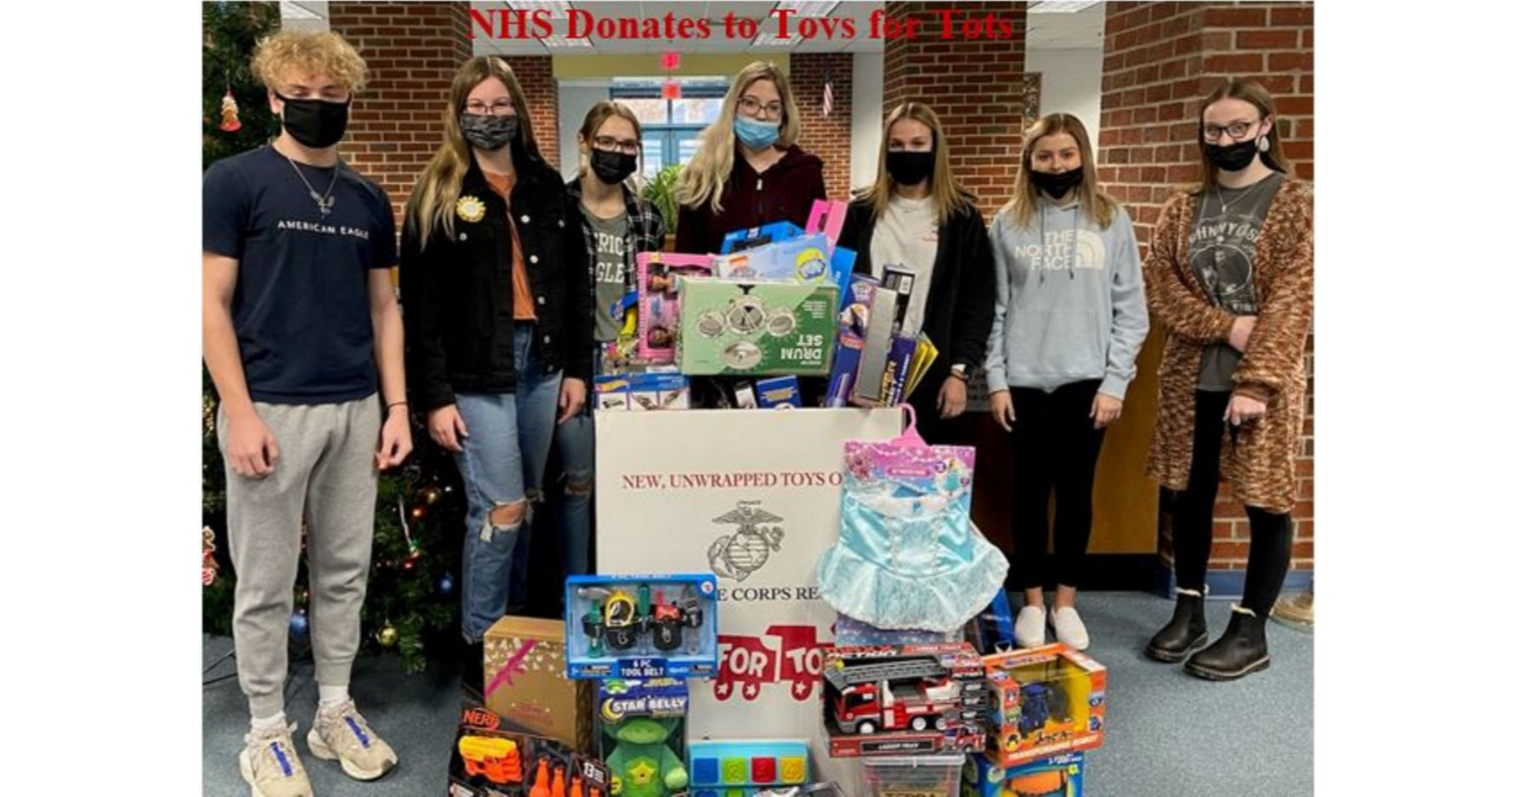 NHS Donates to Toys for Tots